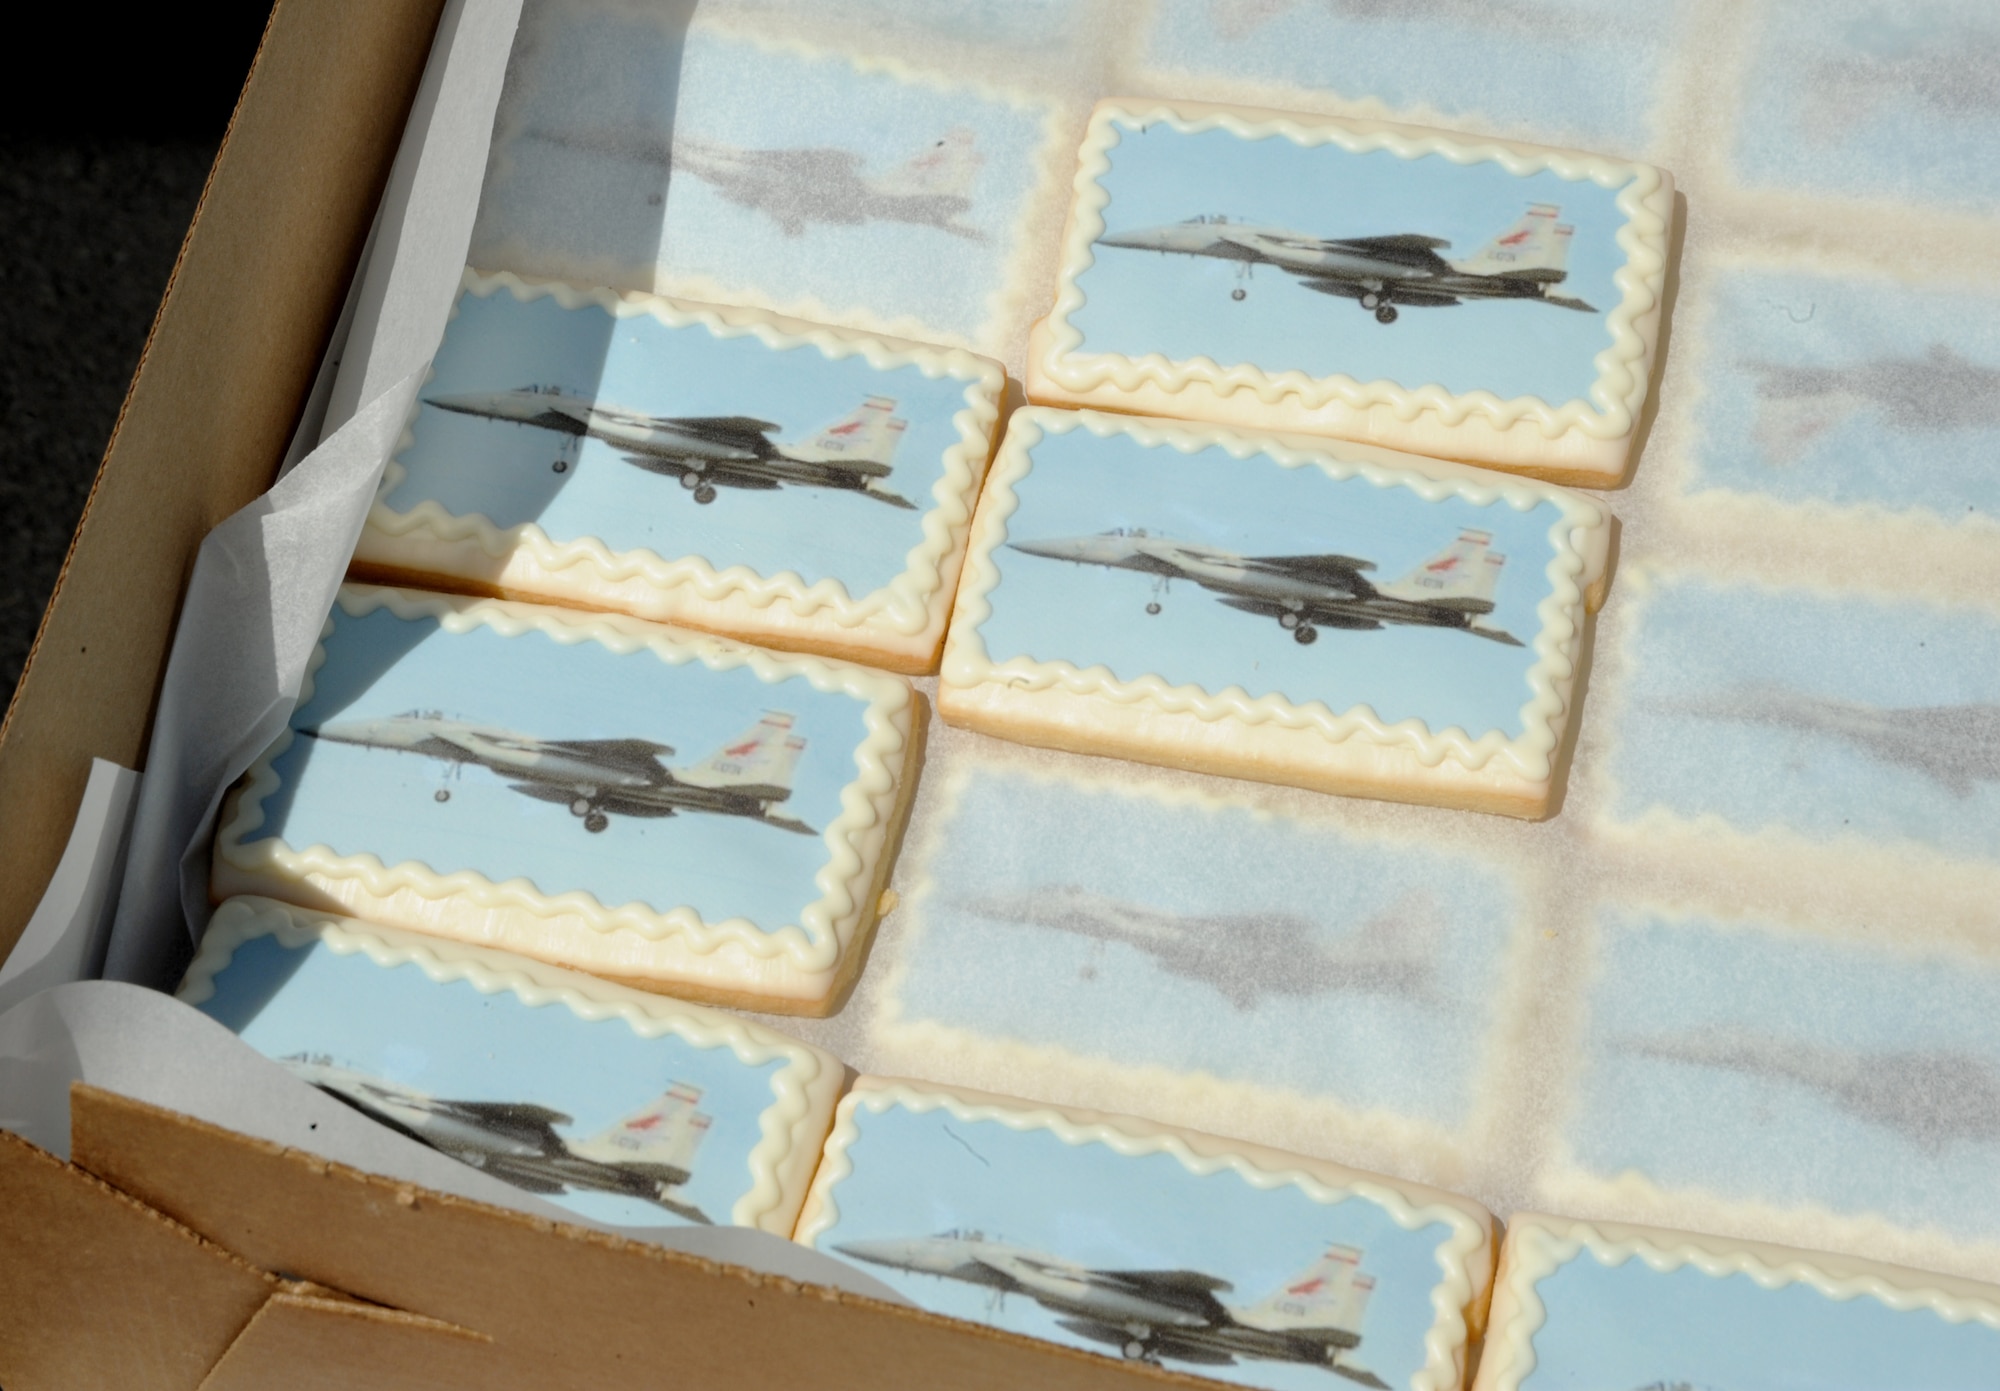 To celebrate the new Service Station opening at the Portland Air National Guard Base, cookies with at 142nd Fighter Wing F-15 Eagle were prepared following the official opening, June 5, 2014. (Air National Guard photo by Tech. Sgt. John Hughel, 142nd Fighter Wing Public Affairs/Released)